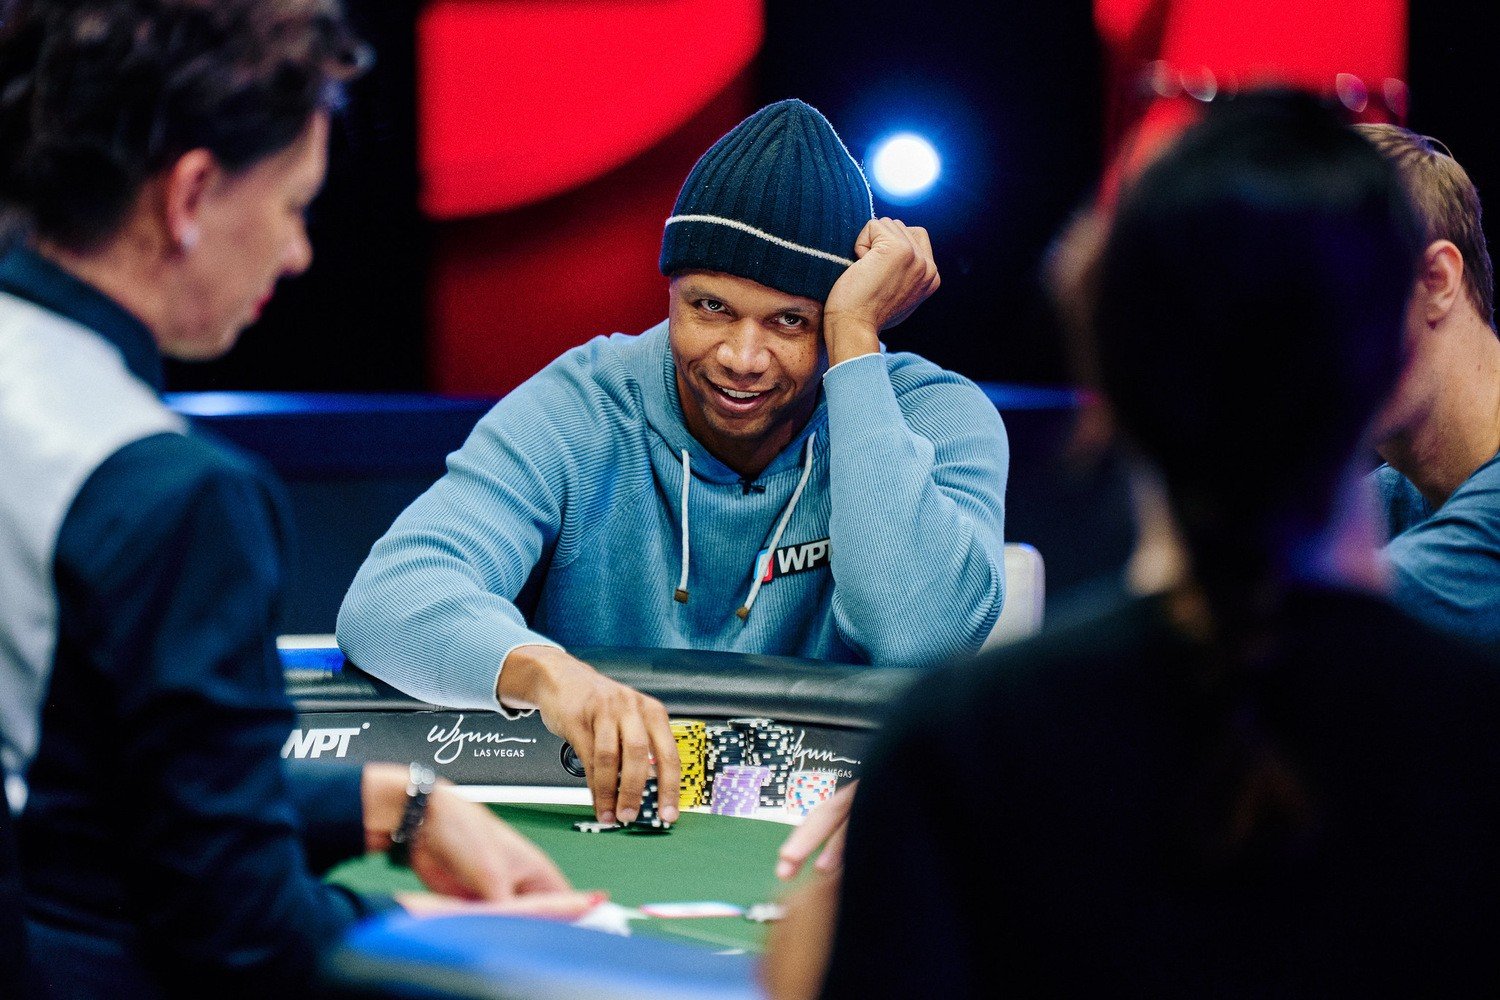 Phil Ivey at WPT Cash Game at The Wynn Las Vegas